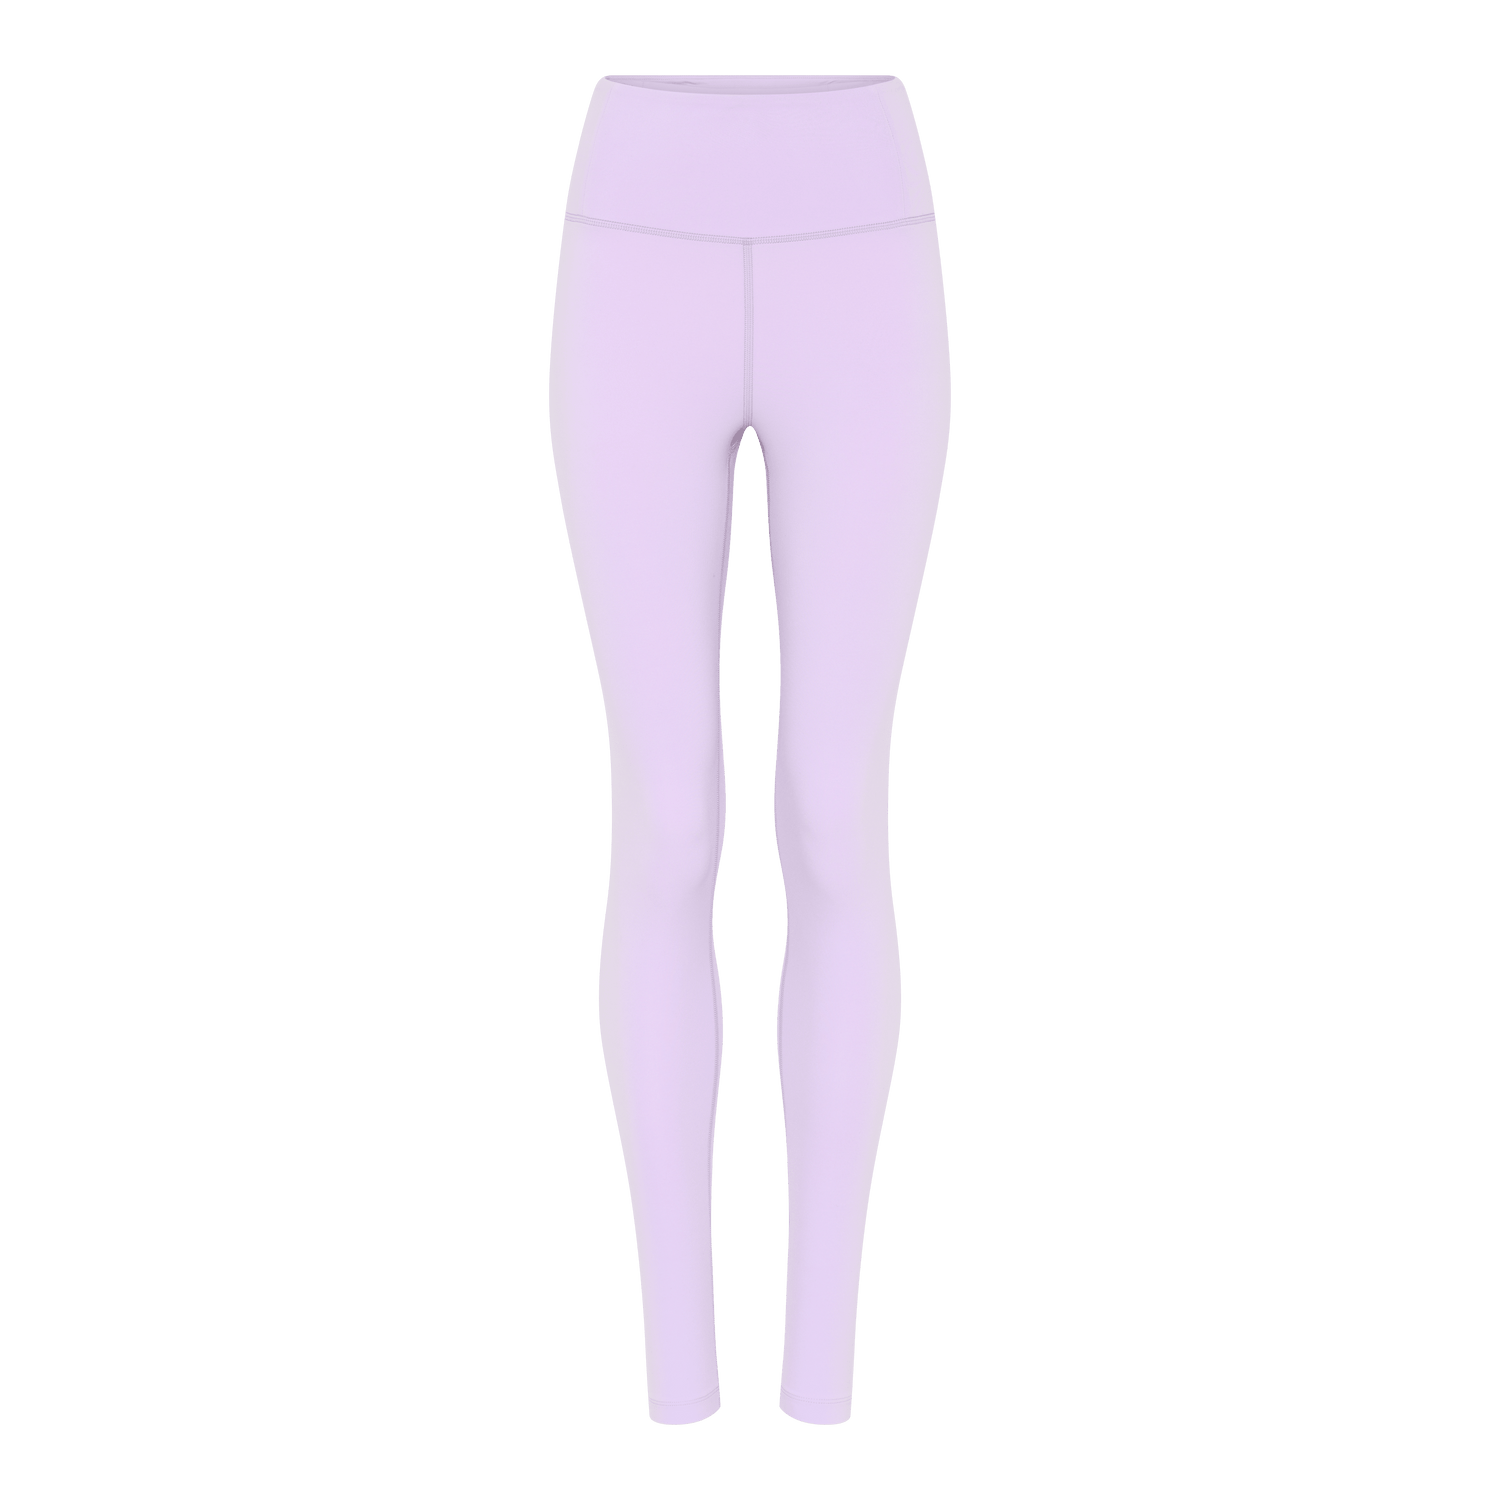 Girlfriend Collective W's Float High-Rise Legging - Made from Recycled plastic bottles Bellflower Normal Pants